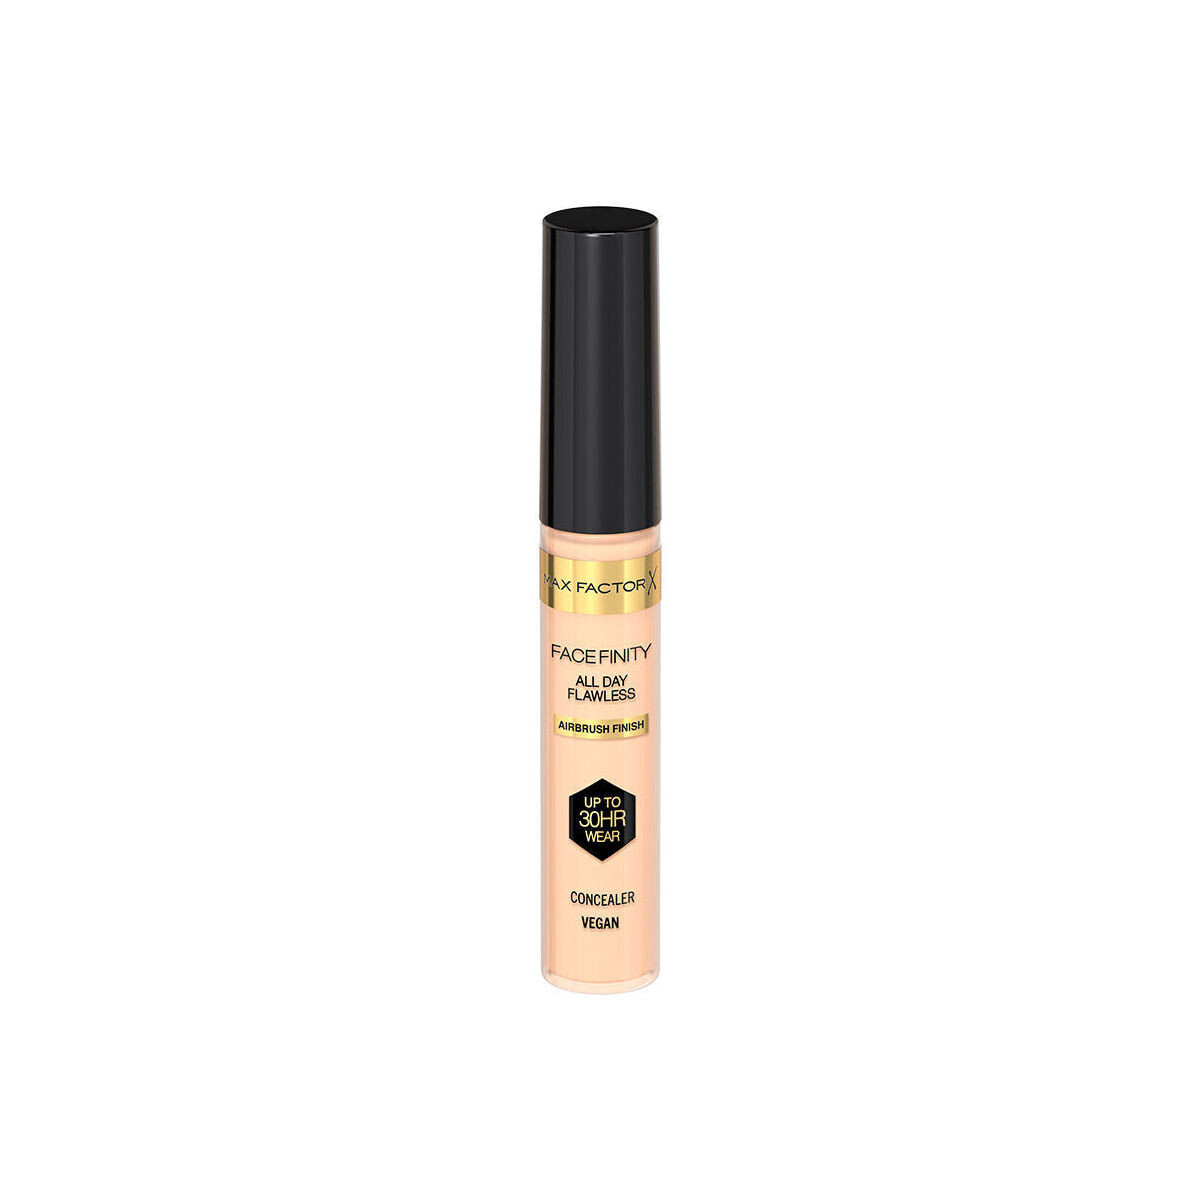 Beauty Damen Make-up & Foundation  Max Factor Facefinity All Day Flawless Concealer 20 